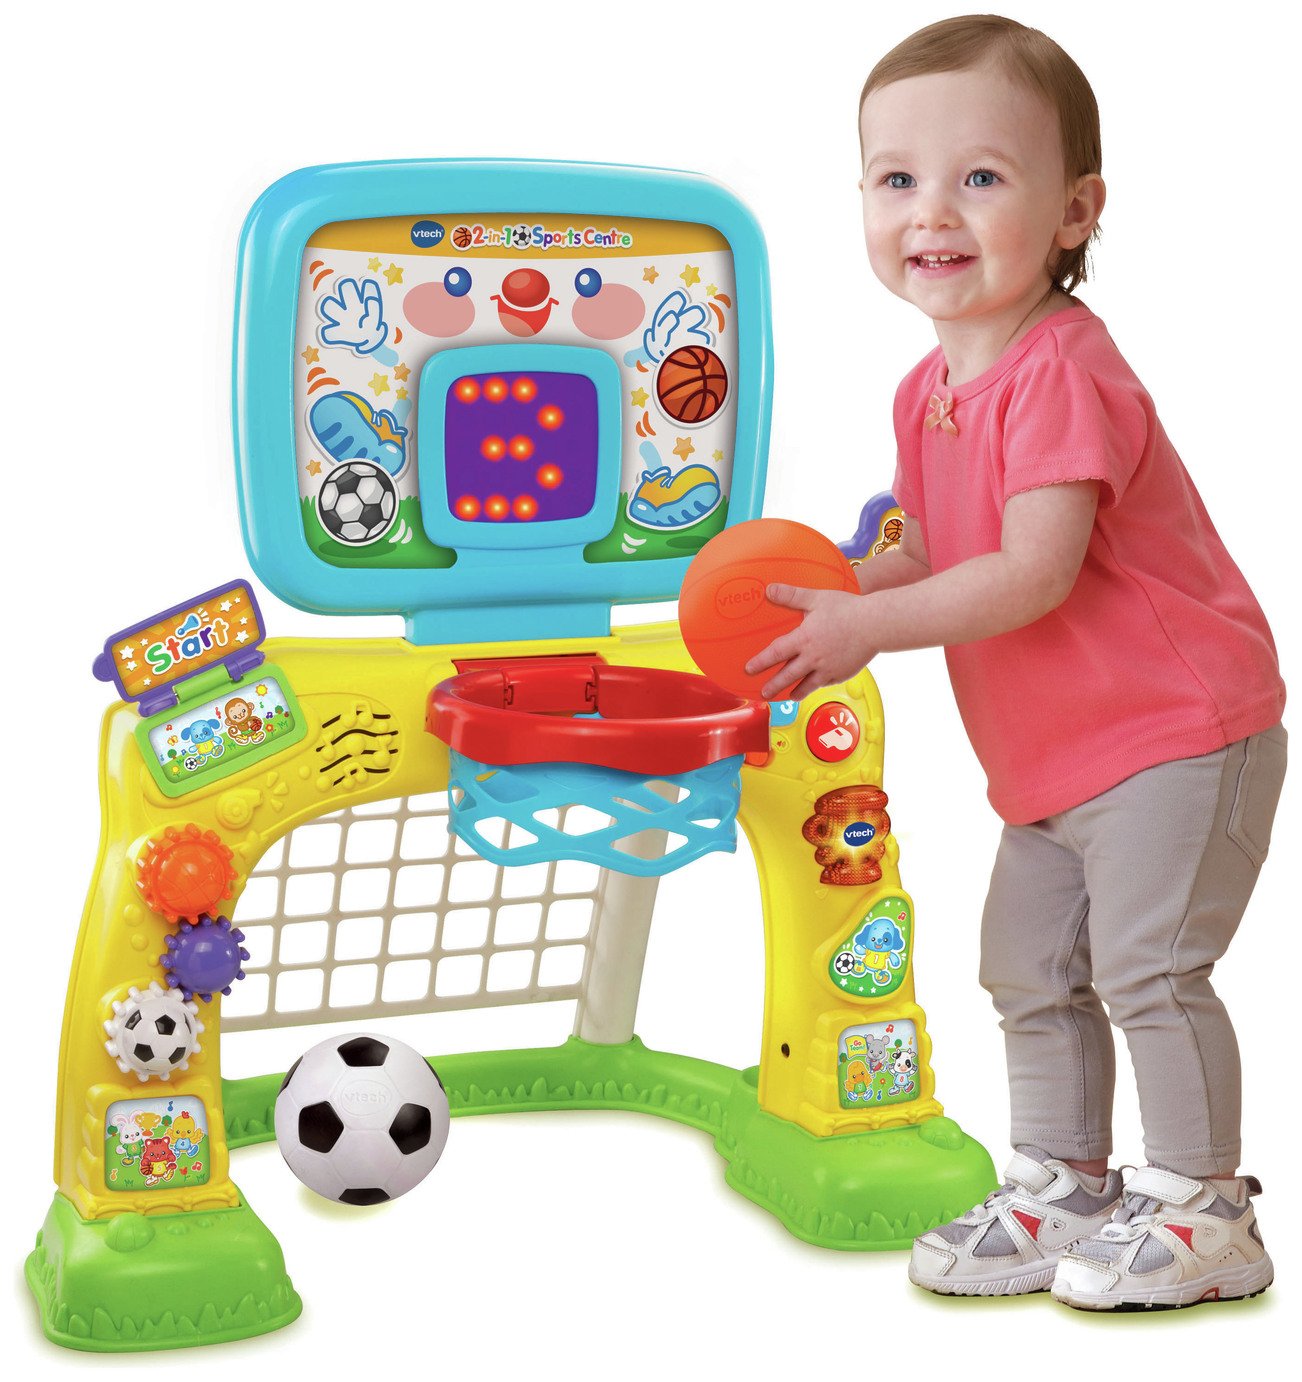 Vtech 2 In 1 Sports Centre Reviews